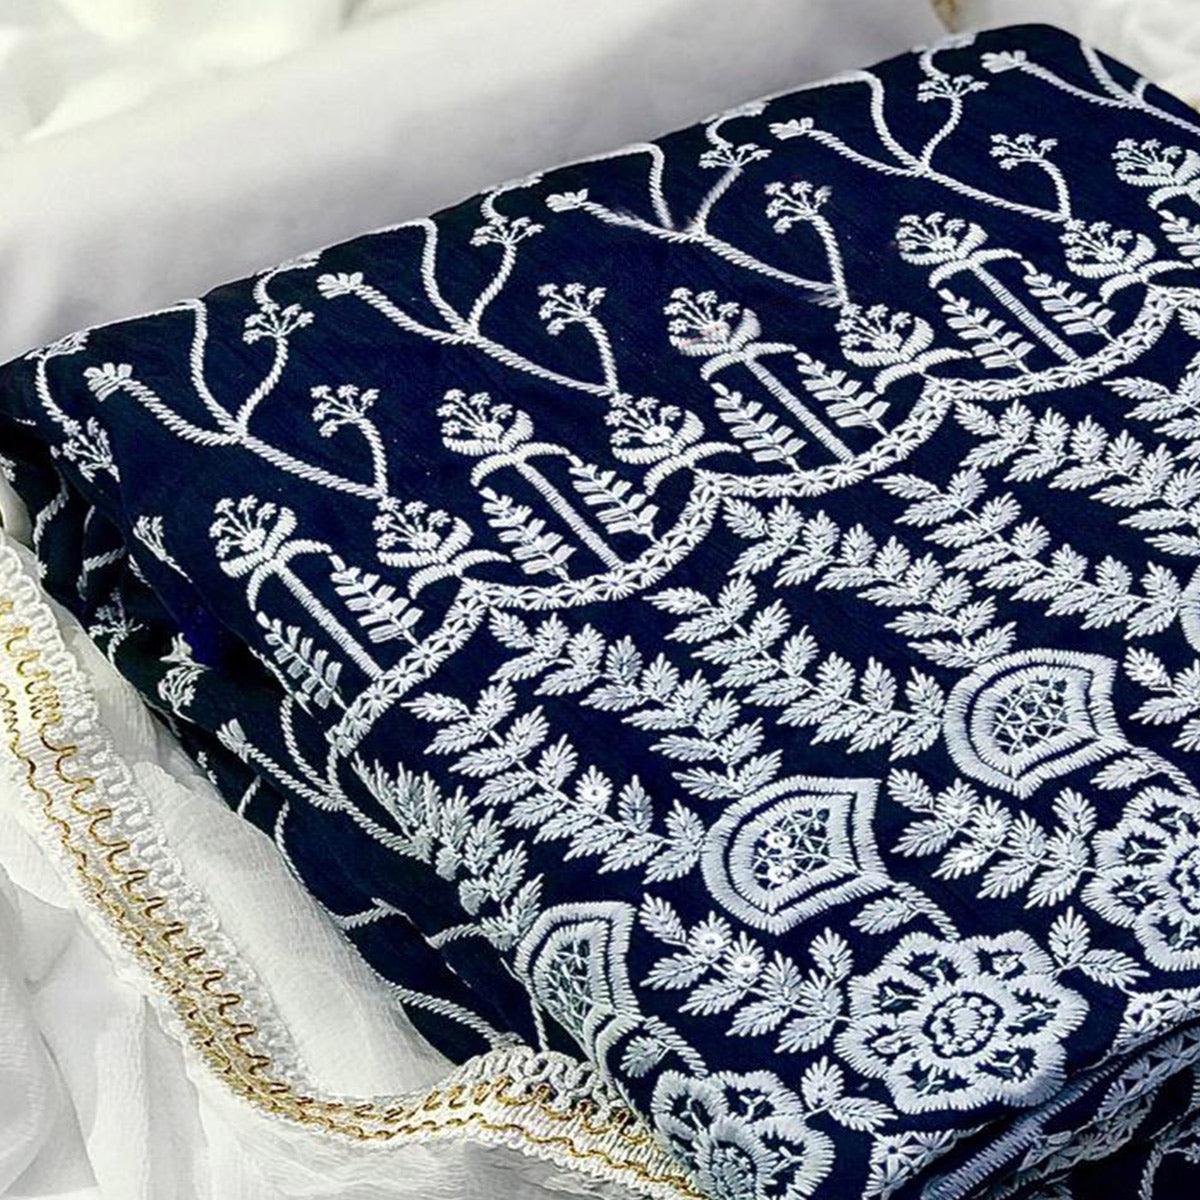 Stunning Navy Blue Colored Casual Wear Floral Embroidered Cotton Dress Material - Peachmode